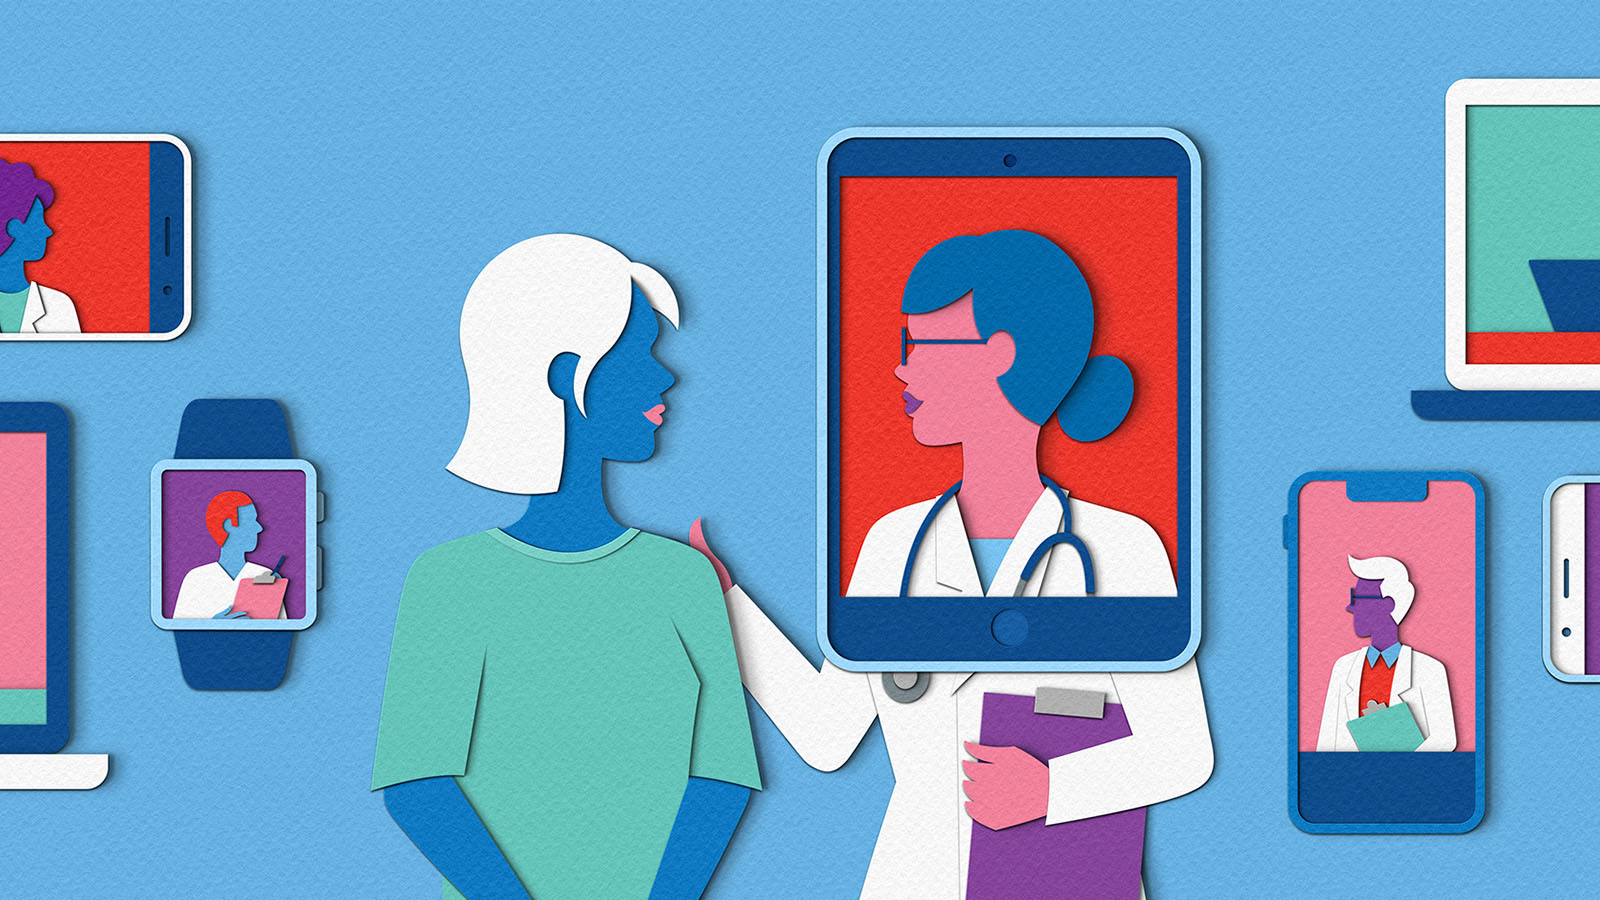 A female patient looks at her doctor; the doctor has an overlay of a cellphone over her face and shoulders.